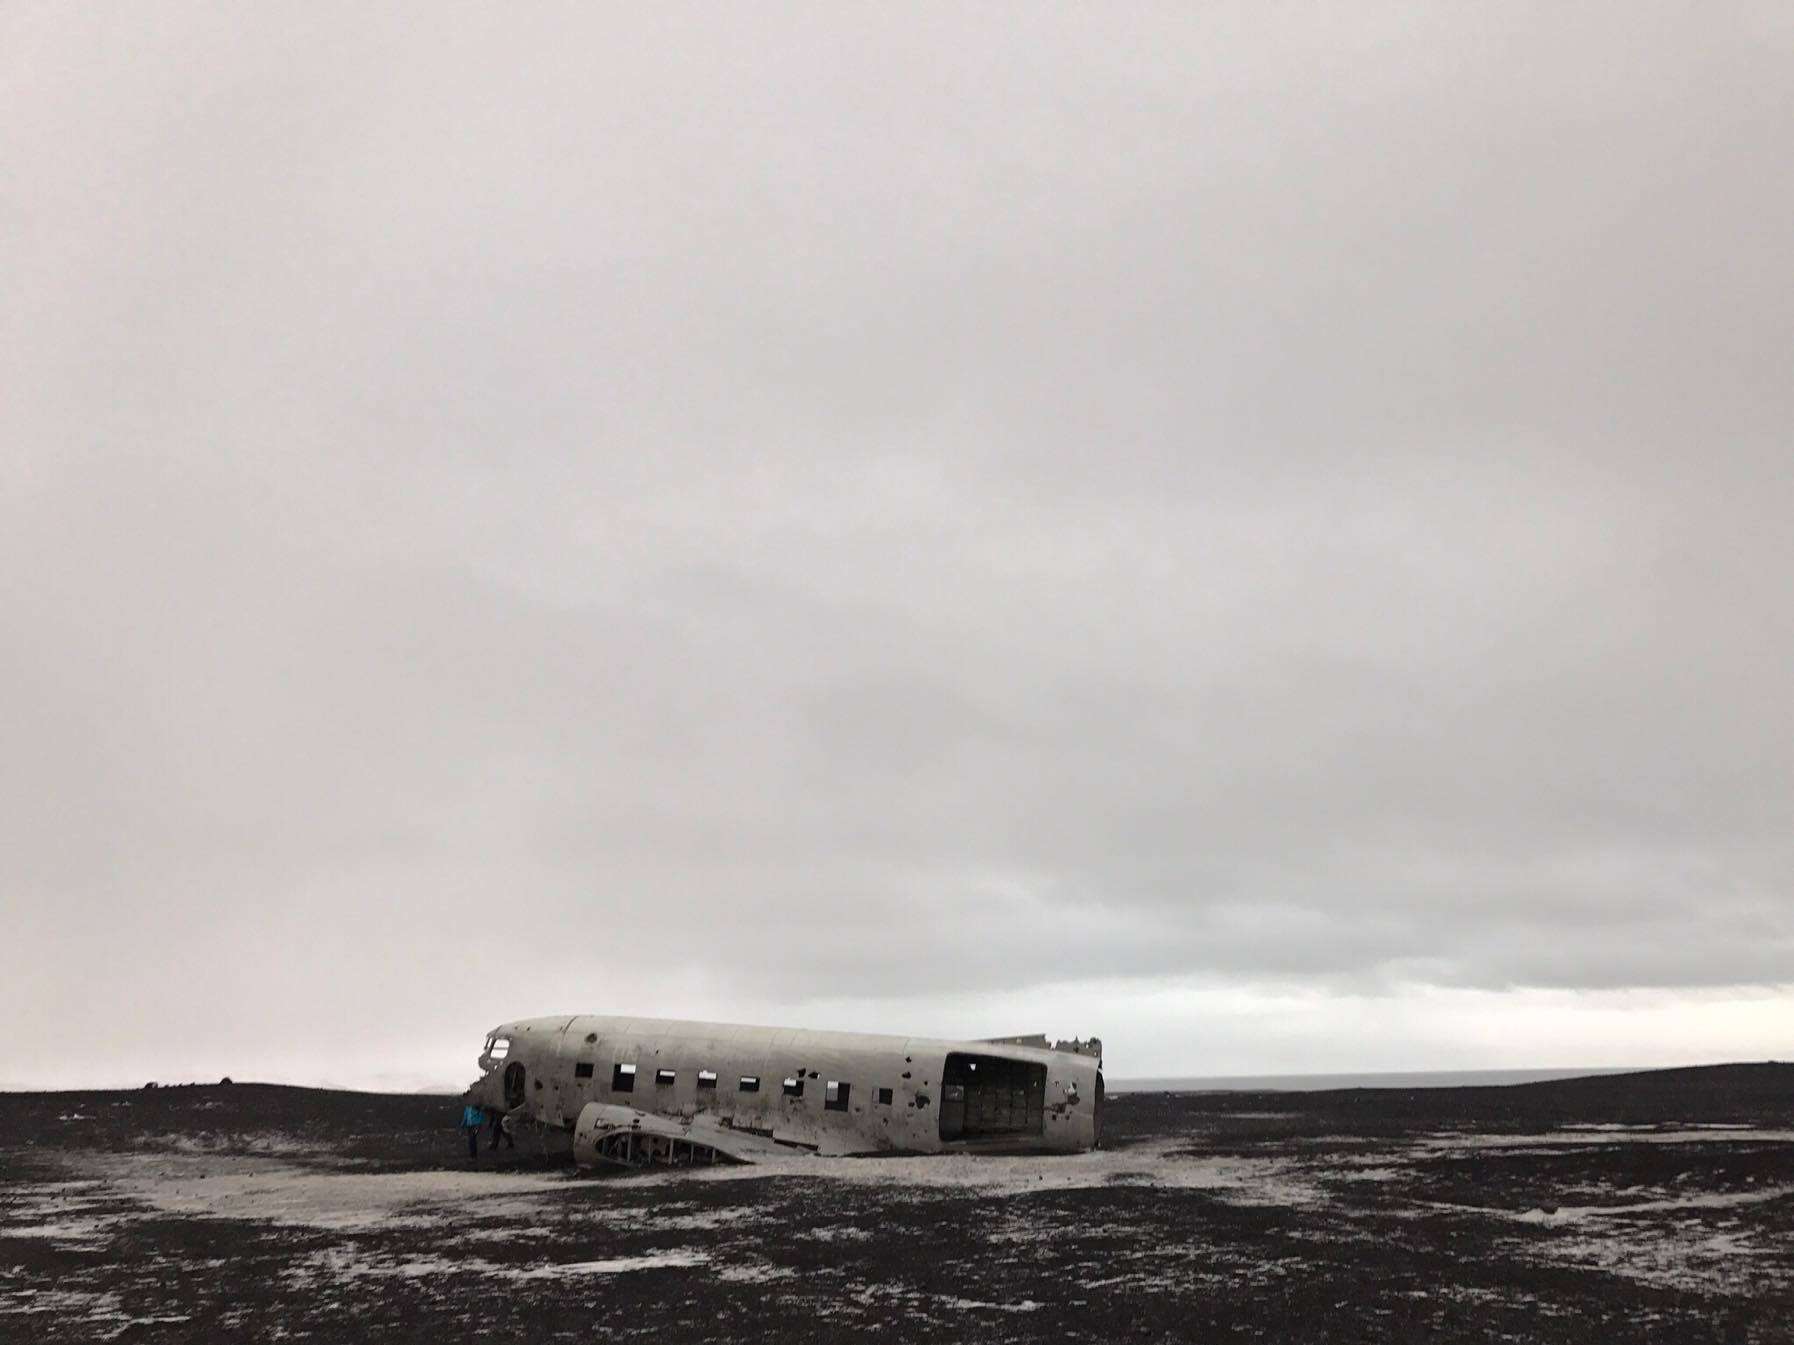 The abandoned airplane in Iceland